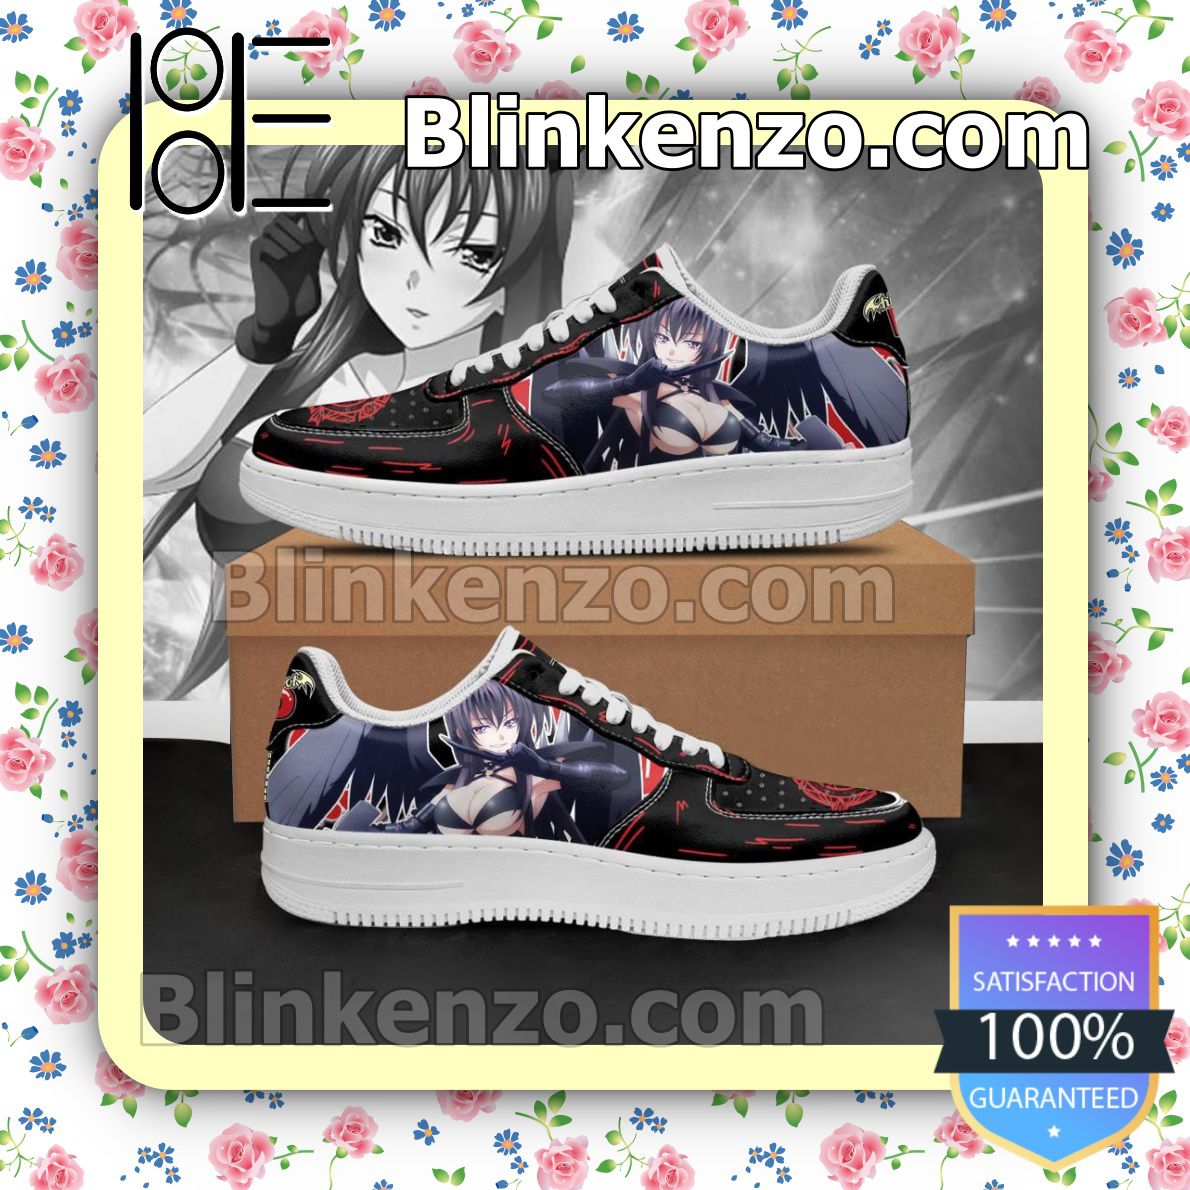 Absolutely Love High School DxD Raynare Anime Nike Air Force Sneakers